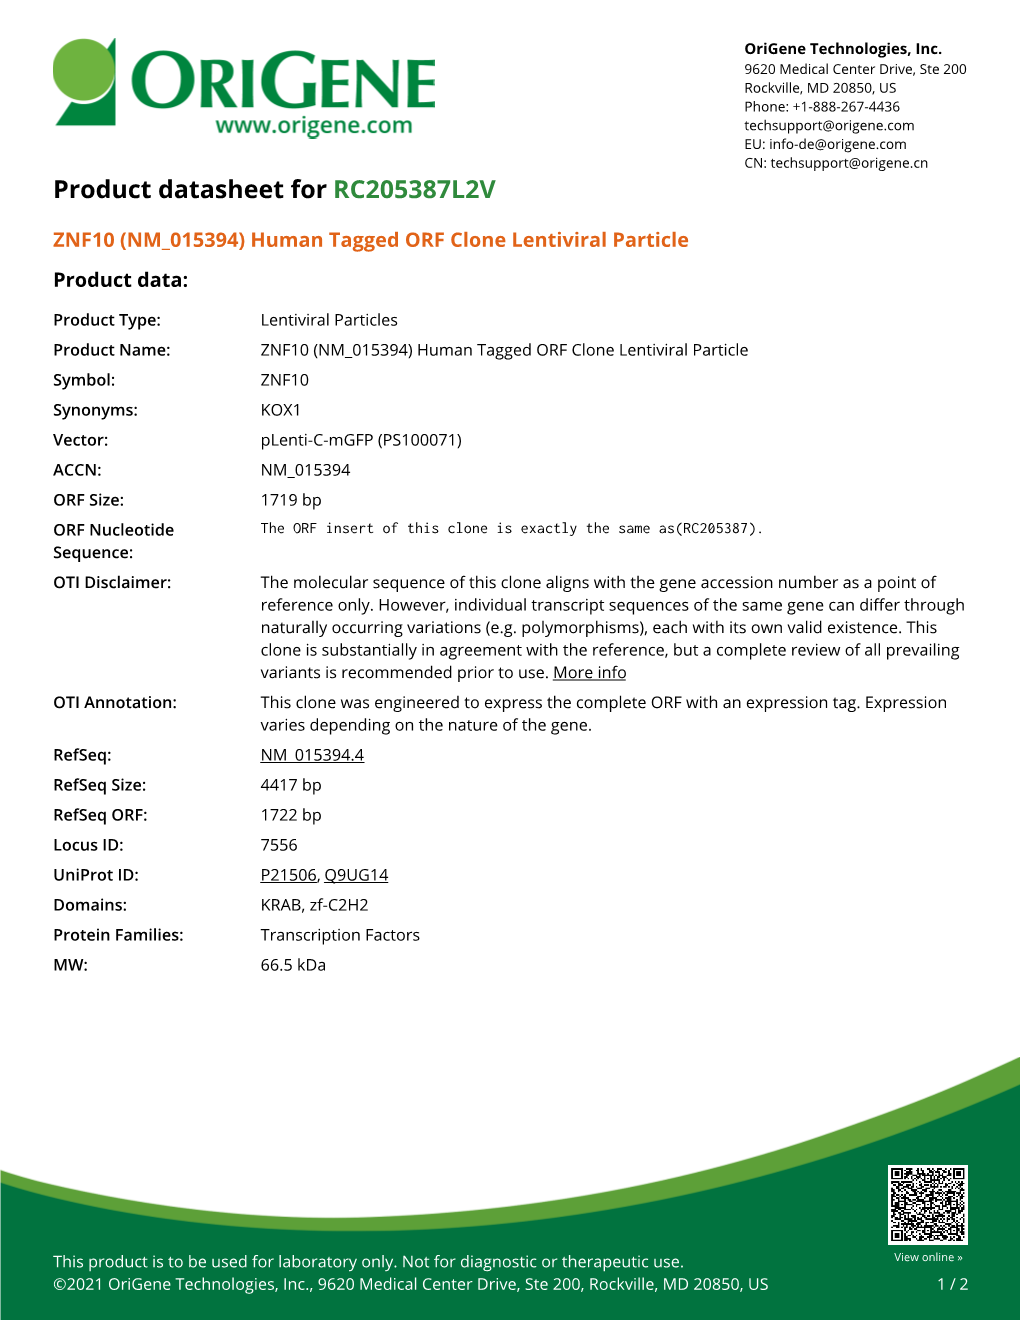 ZNF10 (NM 015394) Human Tagged ORF Clone Lentiviral Particle Product Data